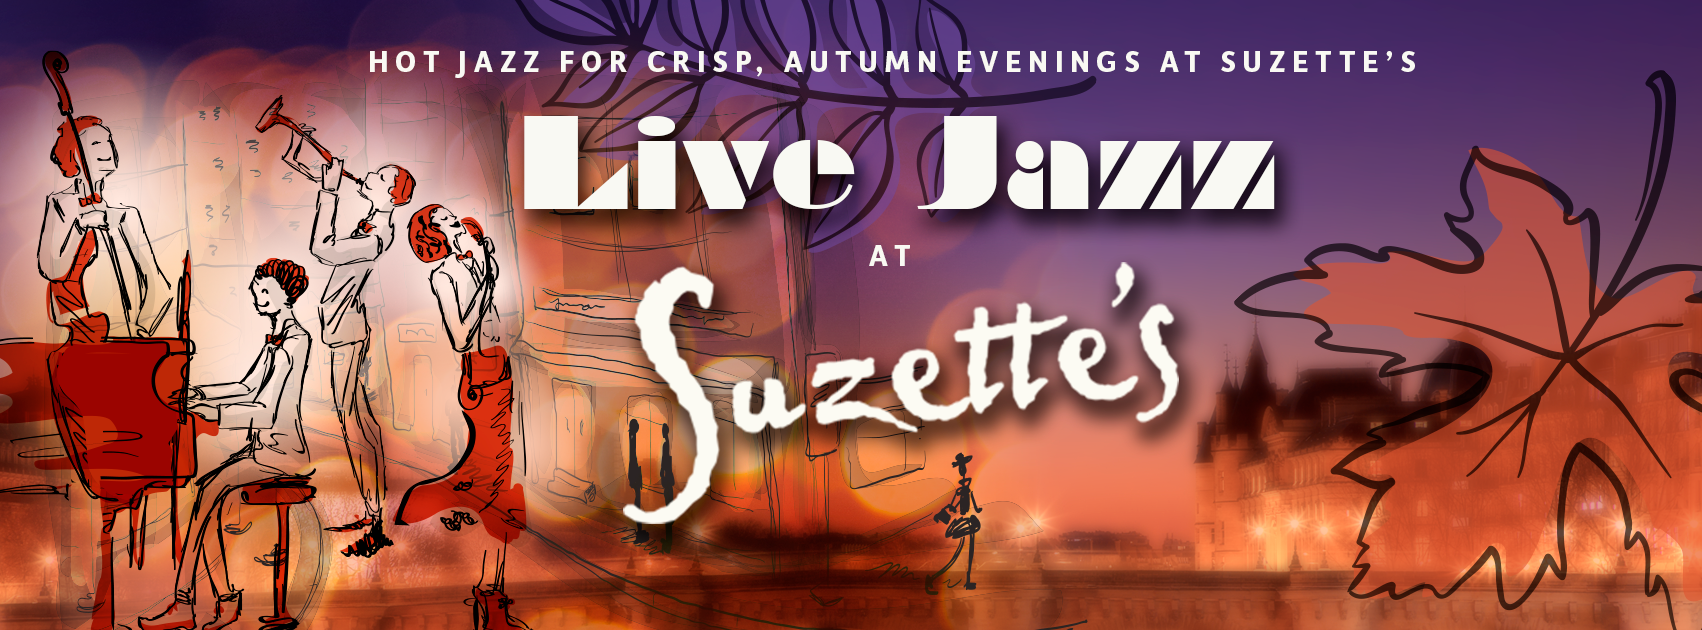 Live Jazz Music at Suzette's in Wheaton